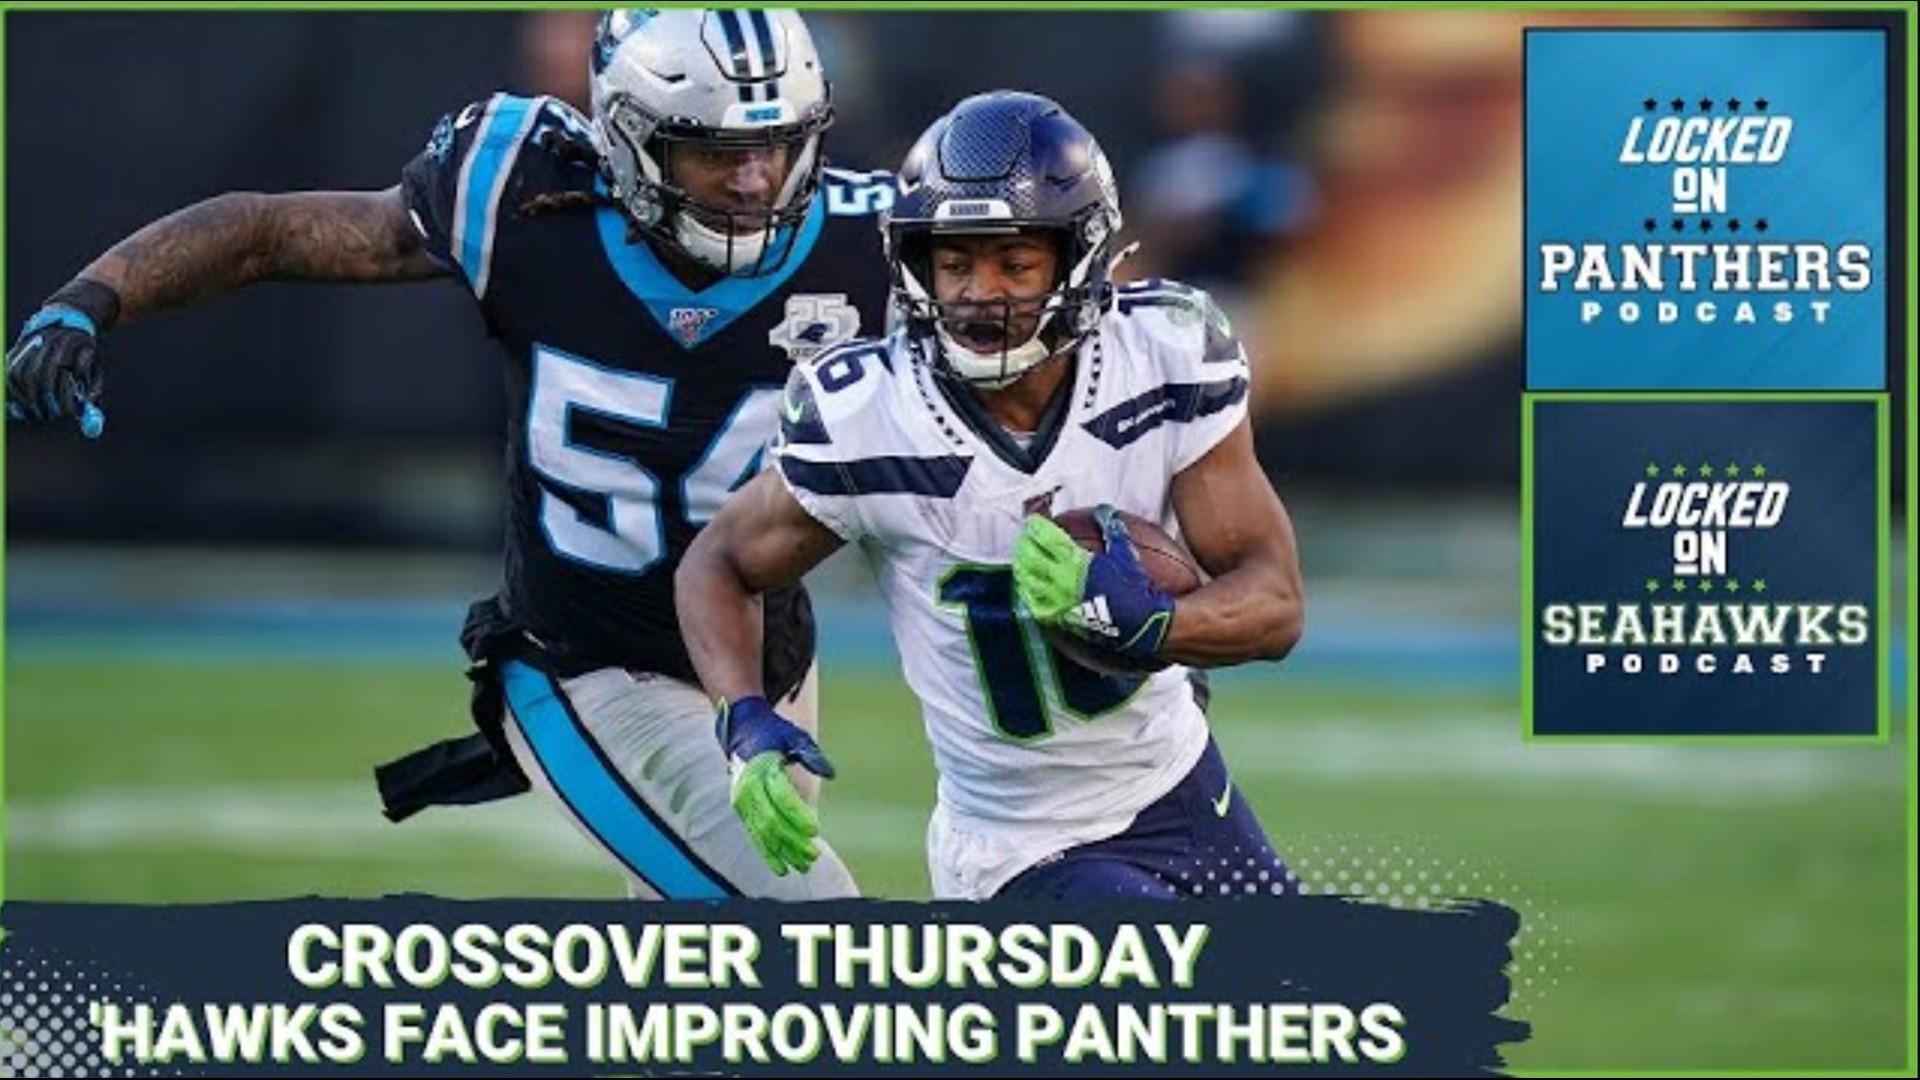 Locked On Seahawks host Corbin Smith and Locked On Panthers host Julian Council share their thoughts on the trajectory of both teams heading into Week 14.